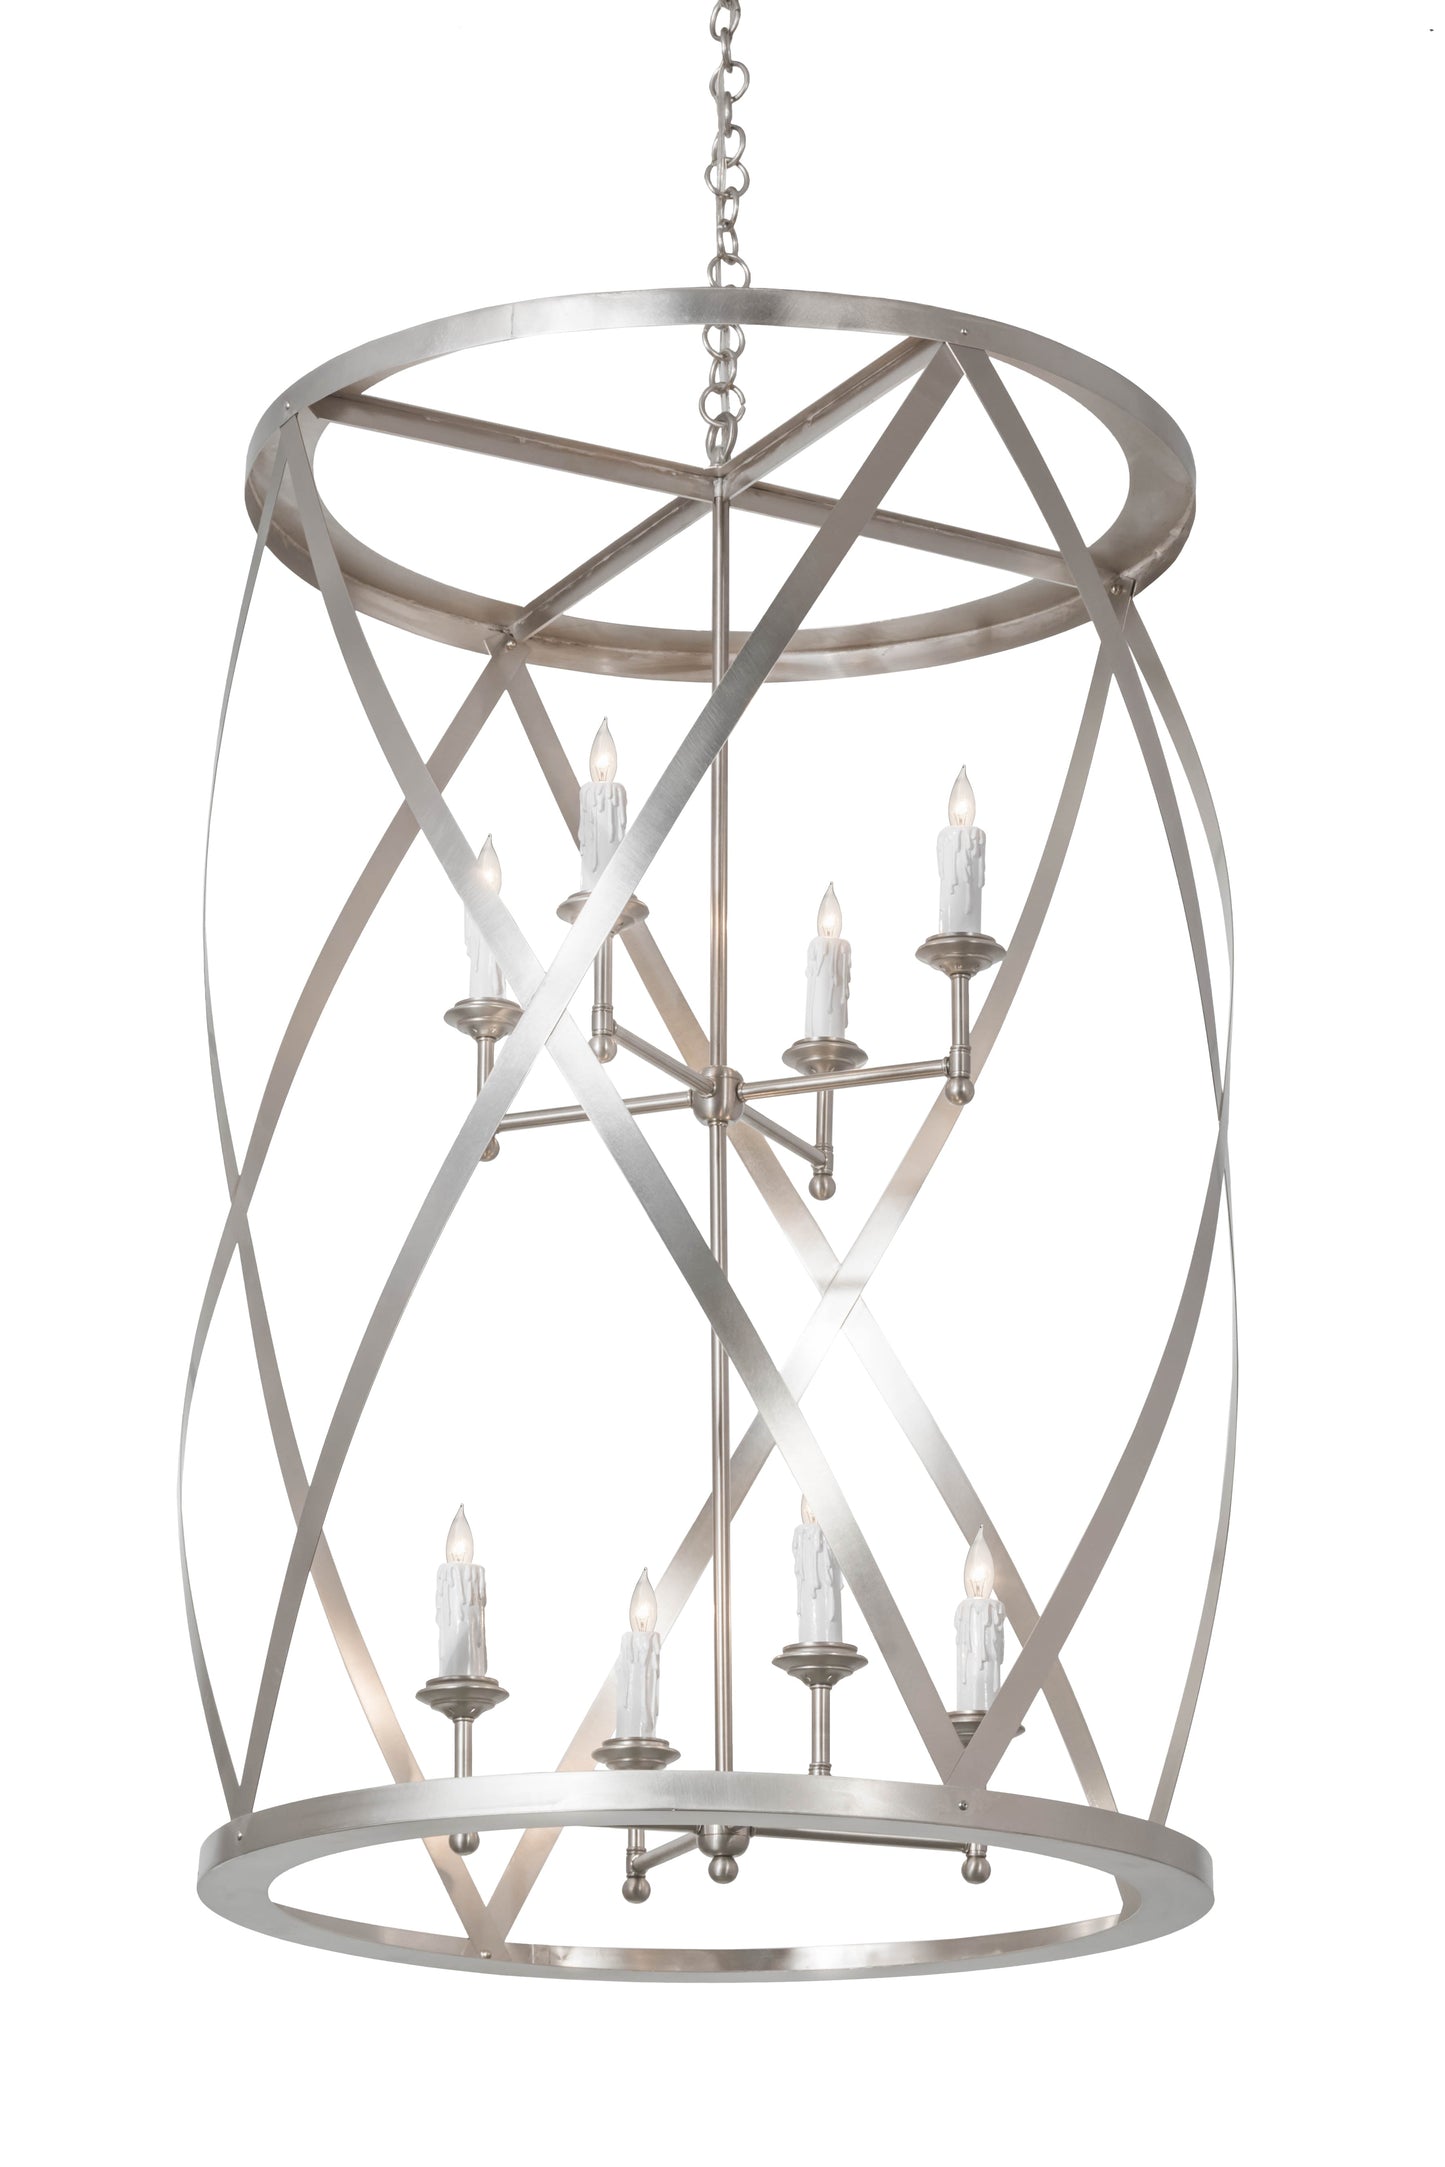 30" Desmond Pendant by 2nd Ave Lighting